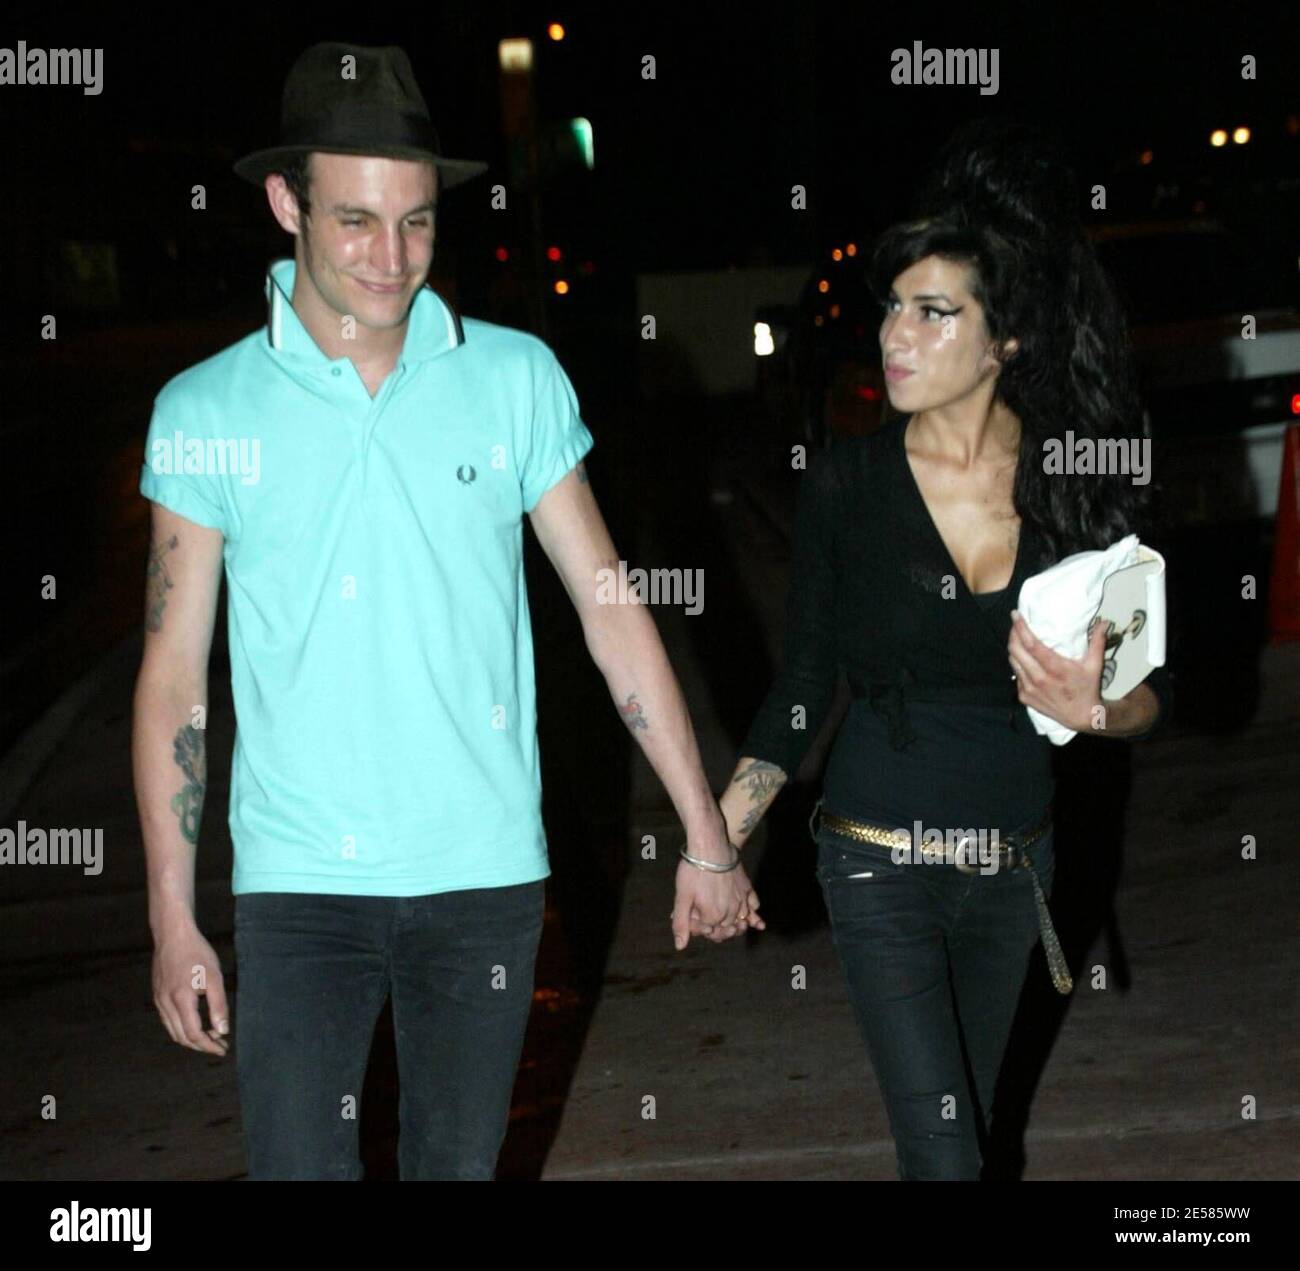 Exclusive!! Newlyweds UK jazz pixie Amy Winehouse and hubby Blake Fielder-Civil take a stroll hand-in-hand on their wedding night in Miami Beach, Fla. 5/18/07.   [[mab]] Stock Photo